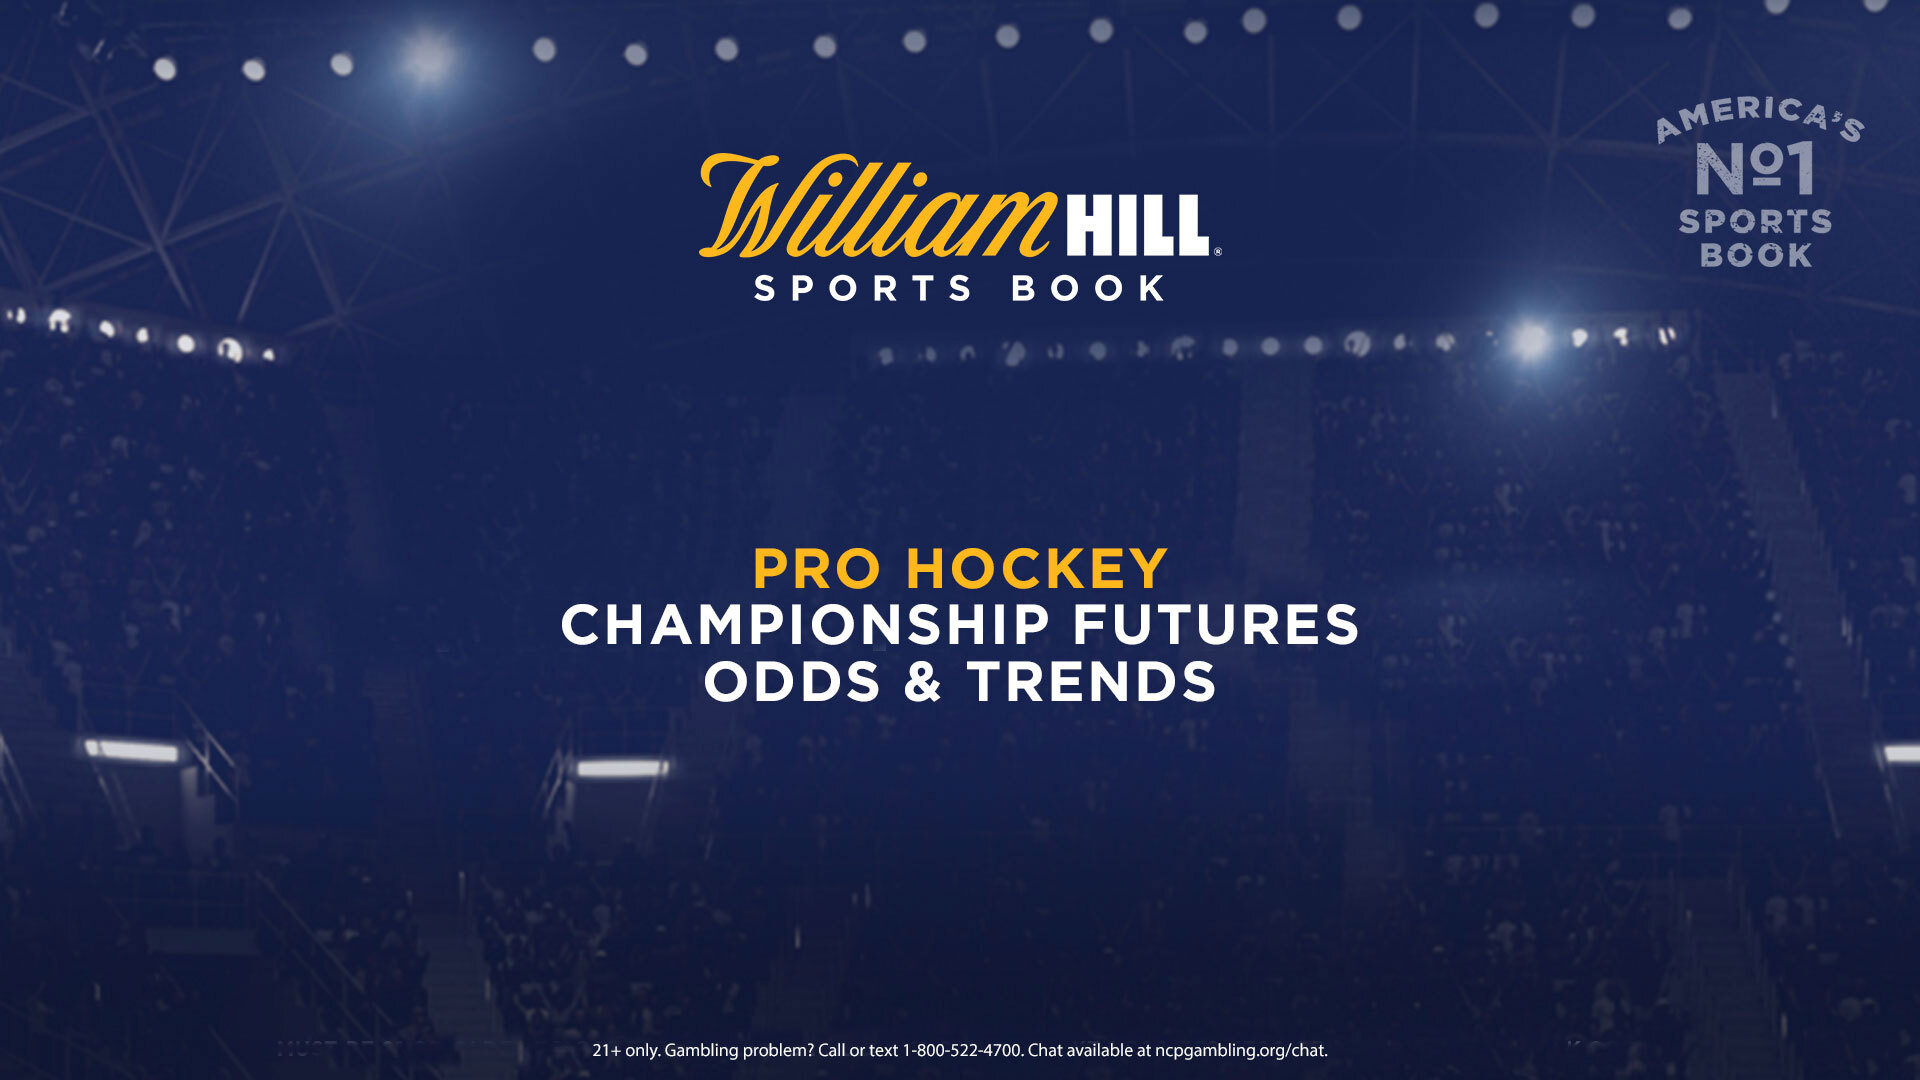 Nhl Stanley Cup Odds 2020